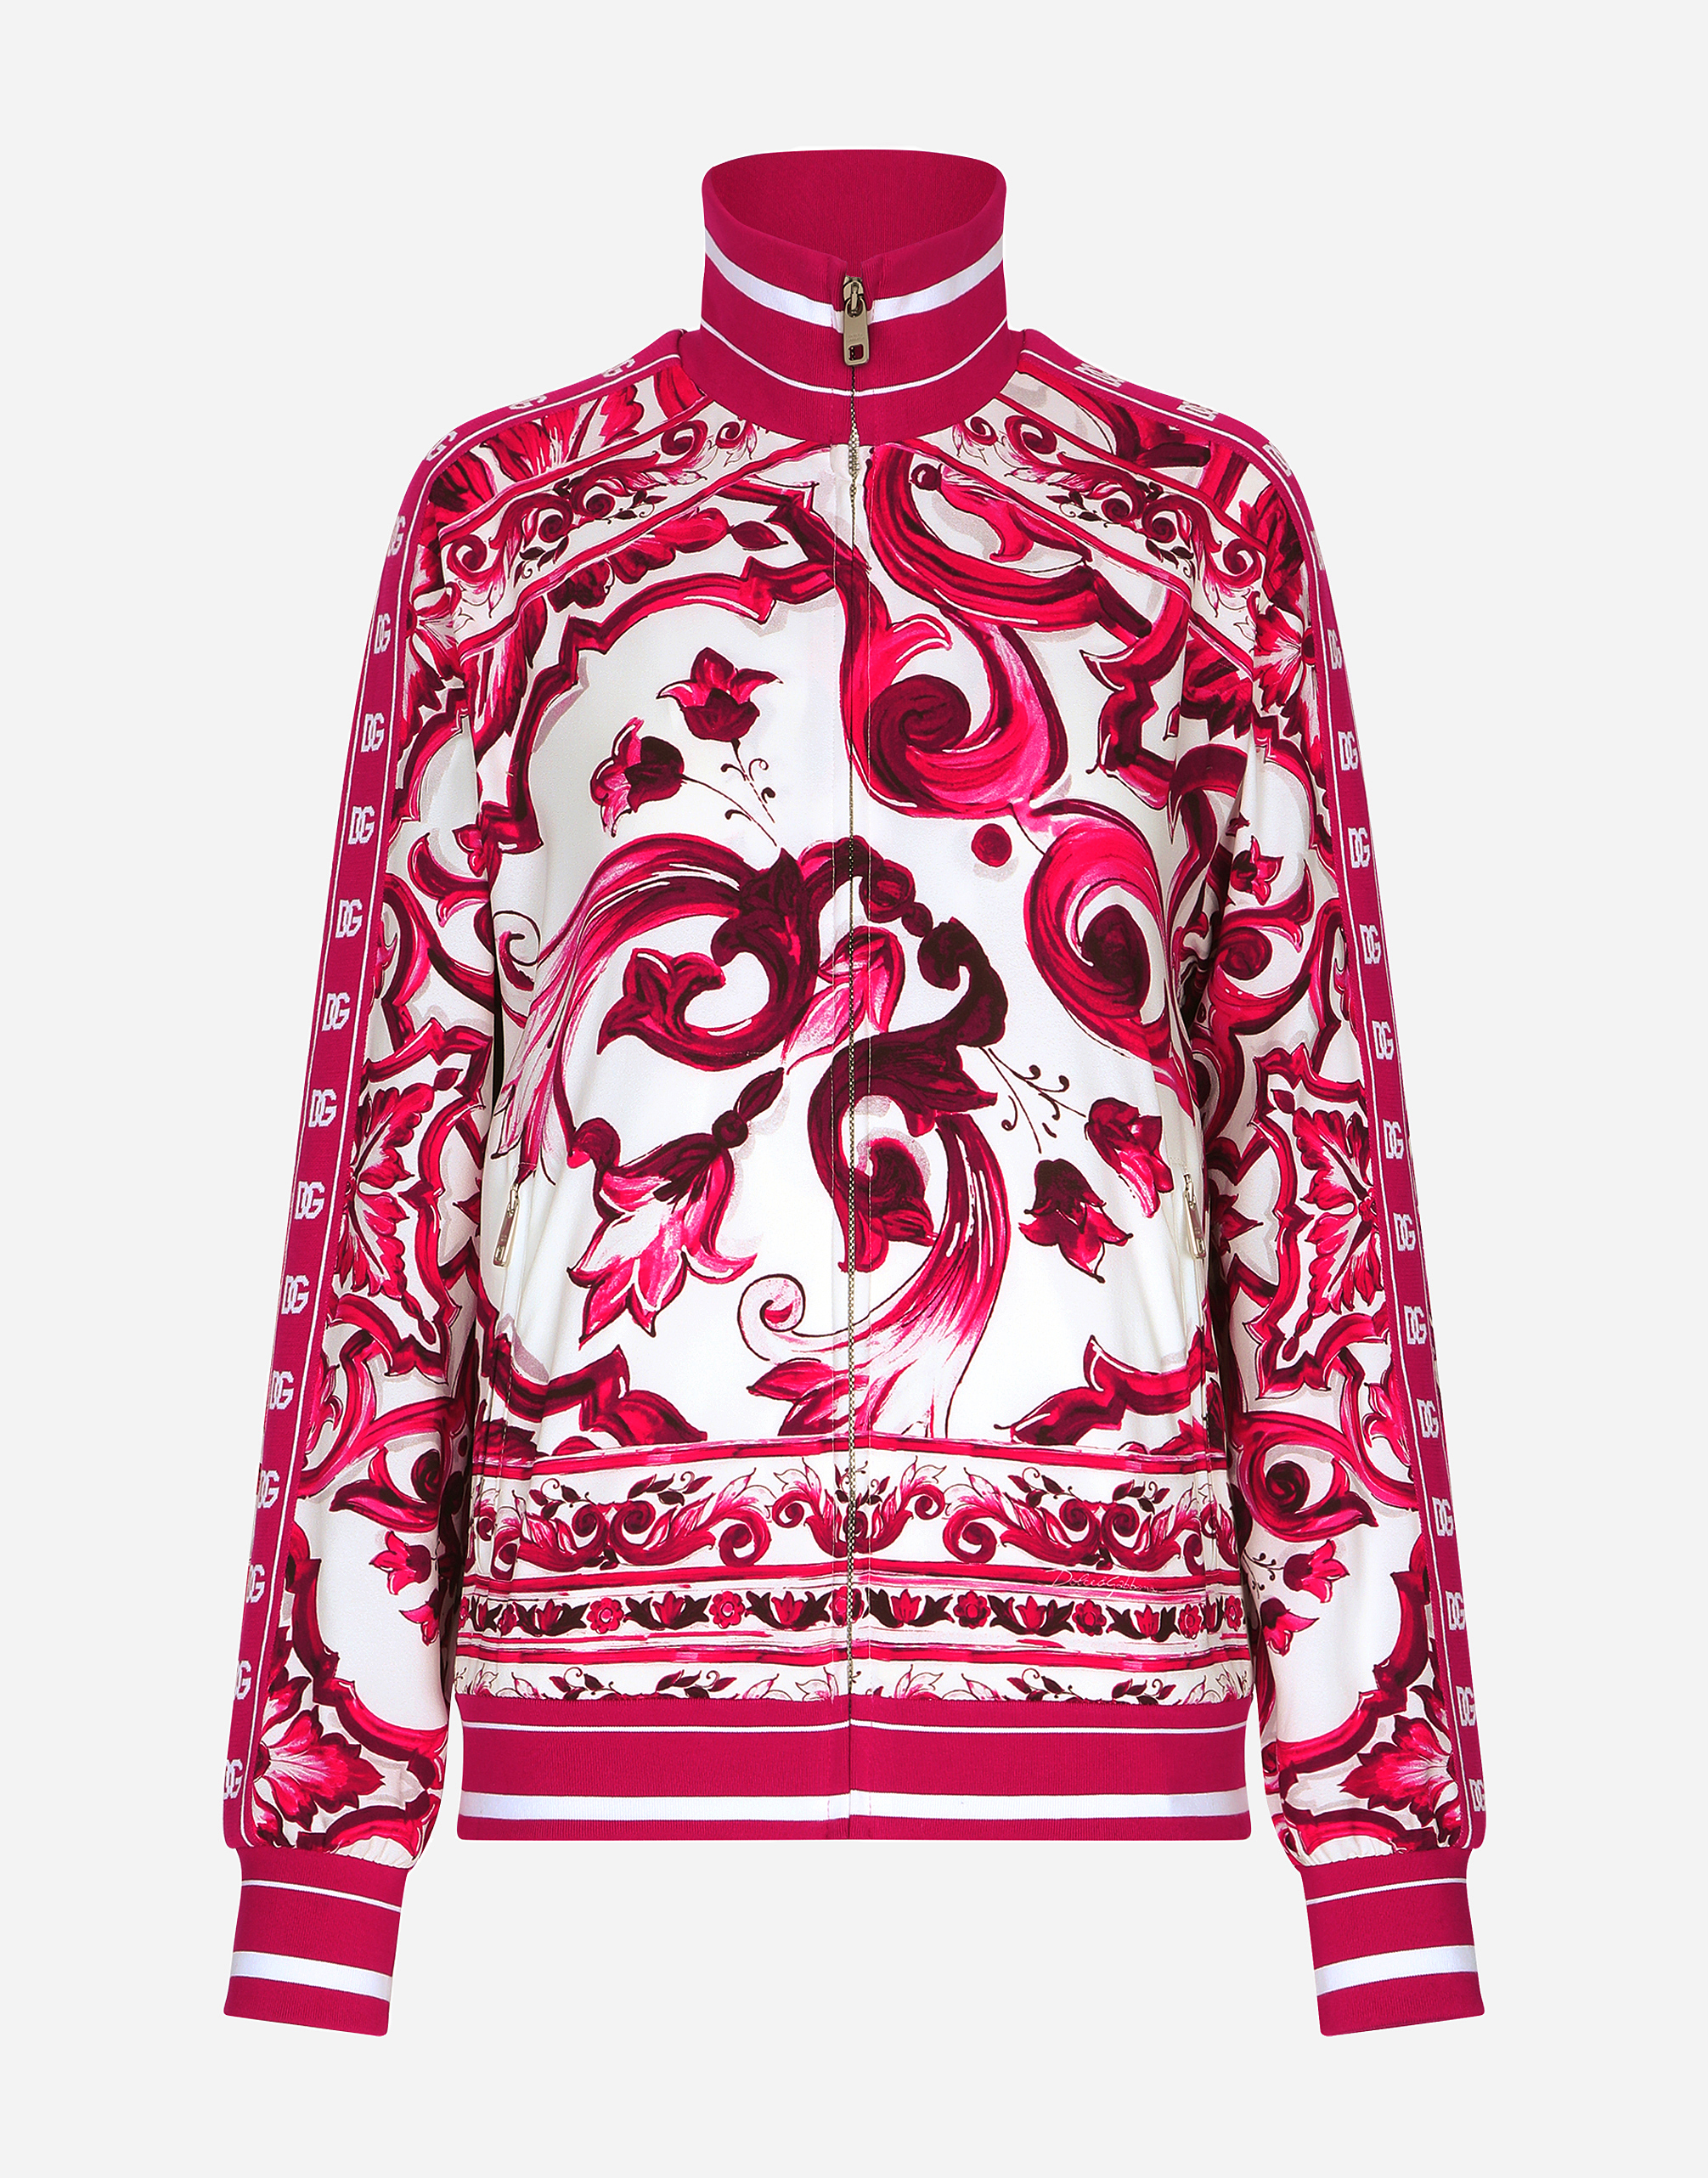 Dolce & Gabbana Maiolica Cady Painterly Zip-front Jacket In Maiolica_2_fuxia